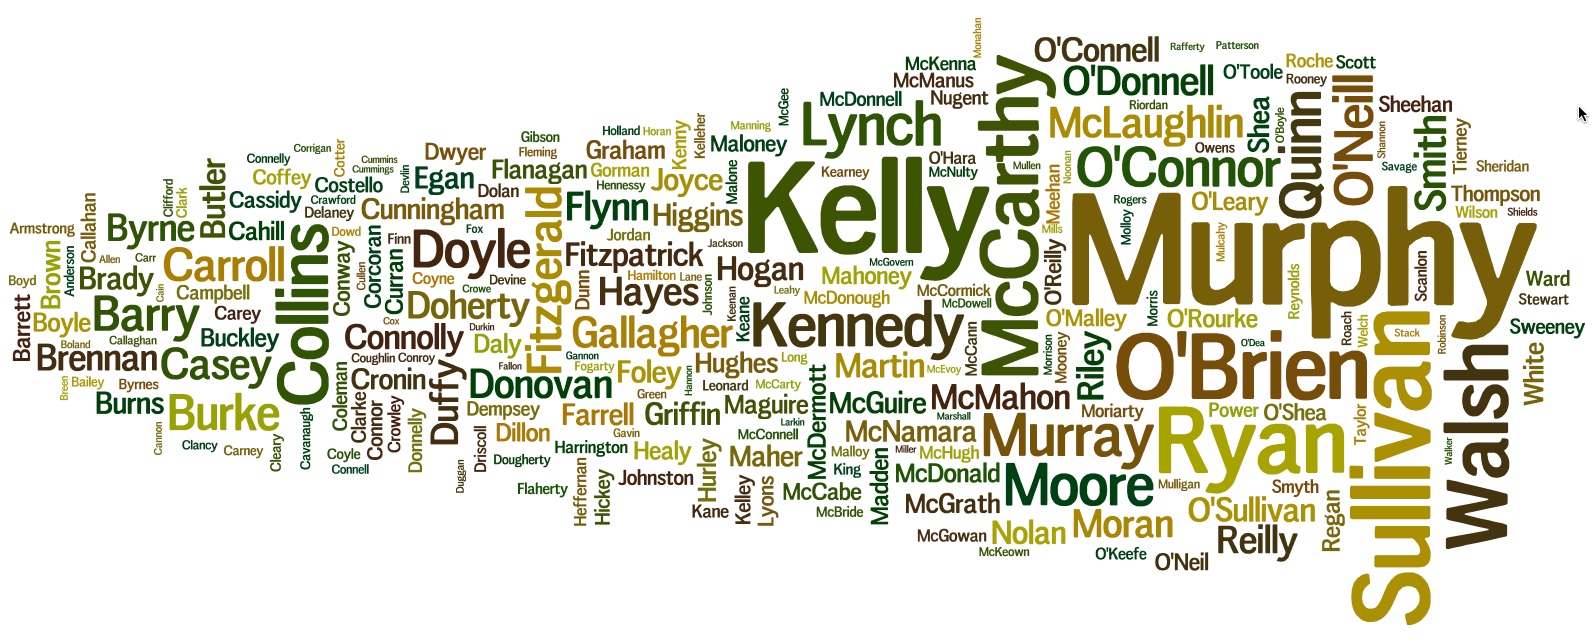 Surname Wordcloud March 2016 Top 250 Names